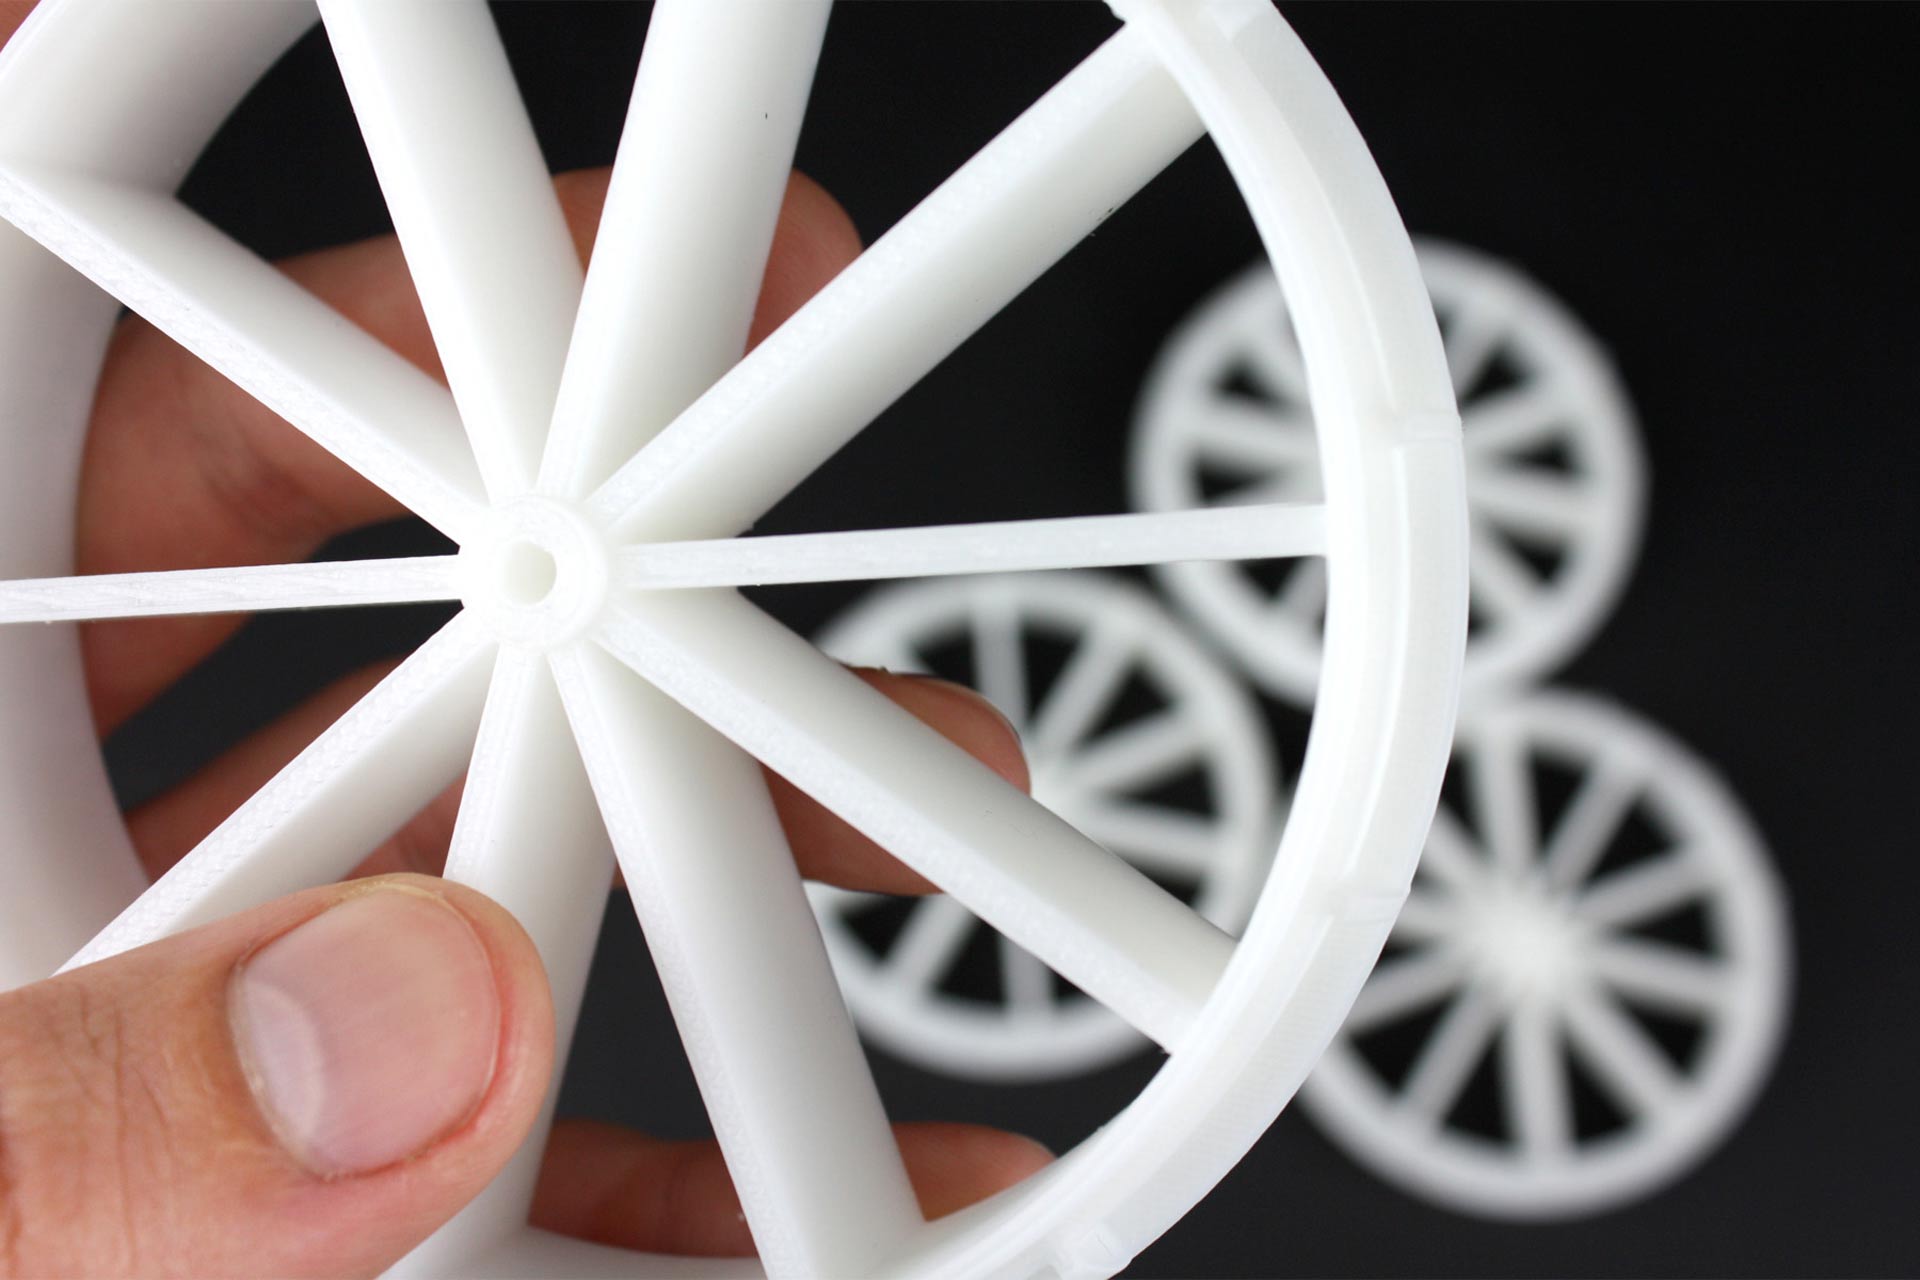 A 3D printed wheel for a kids toy